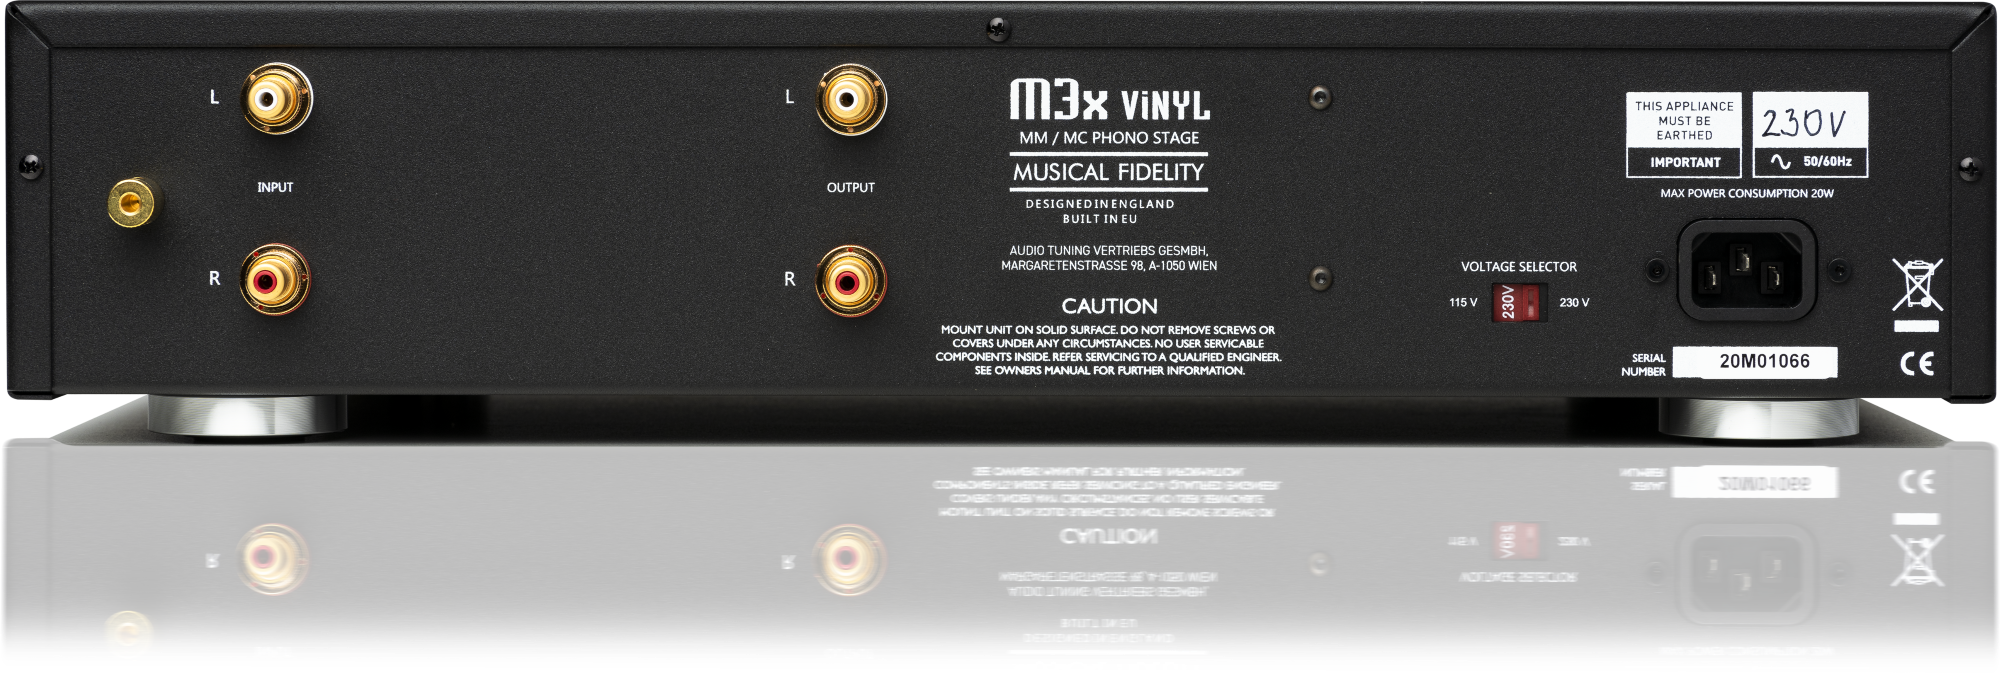 Musical Fidelity M3X Vinyl Phono Stage - Safe and Sound HQ